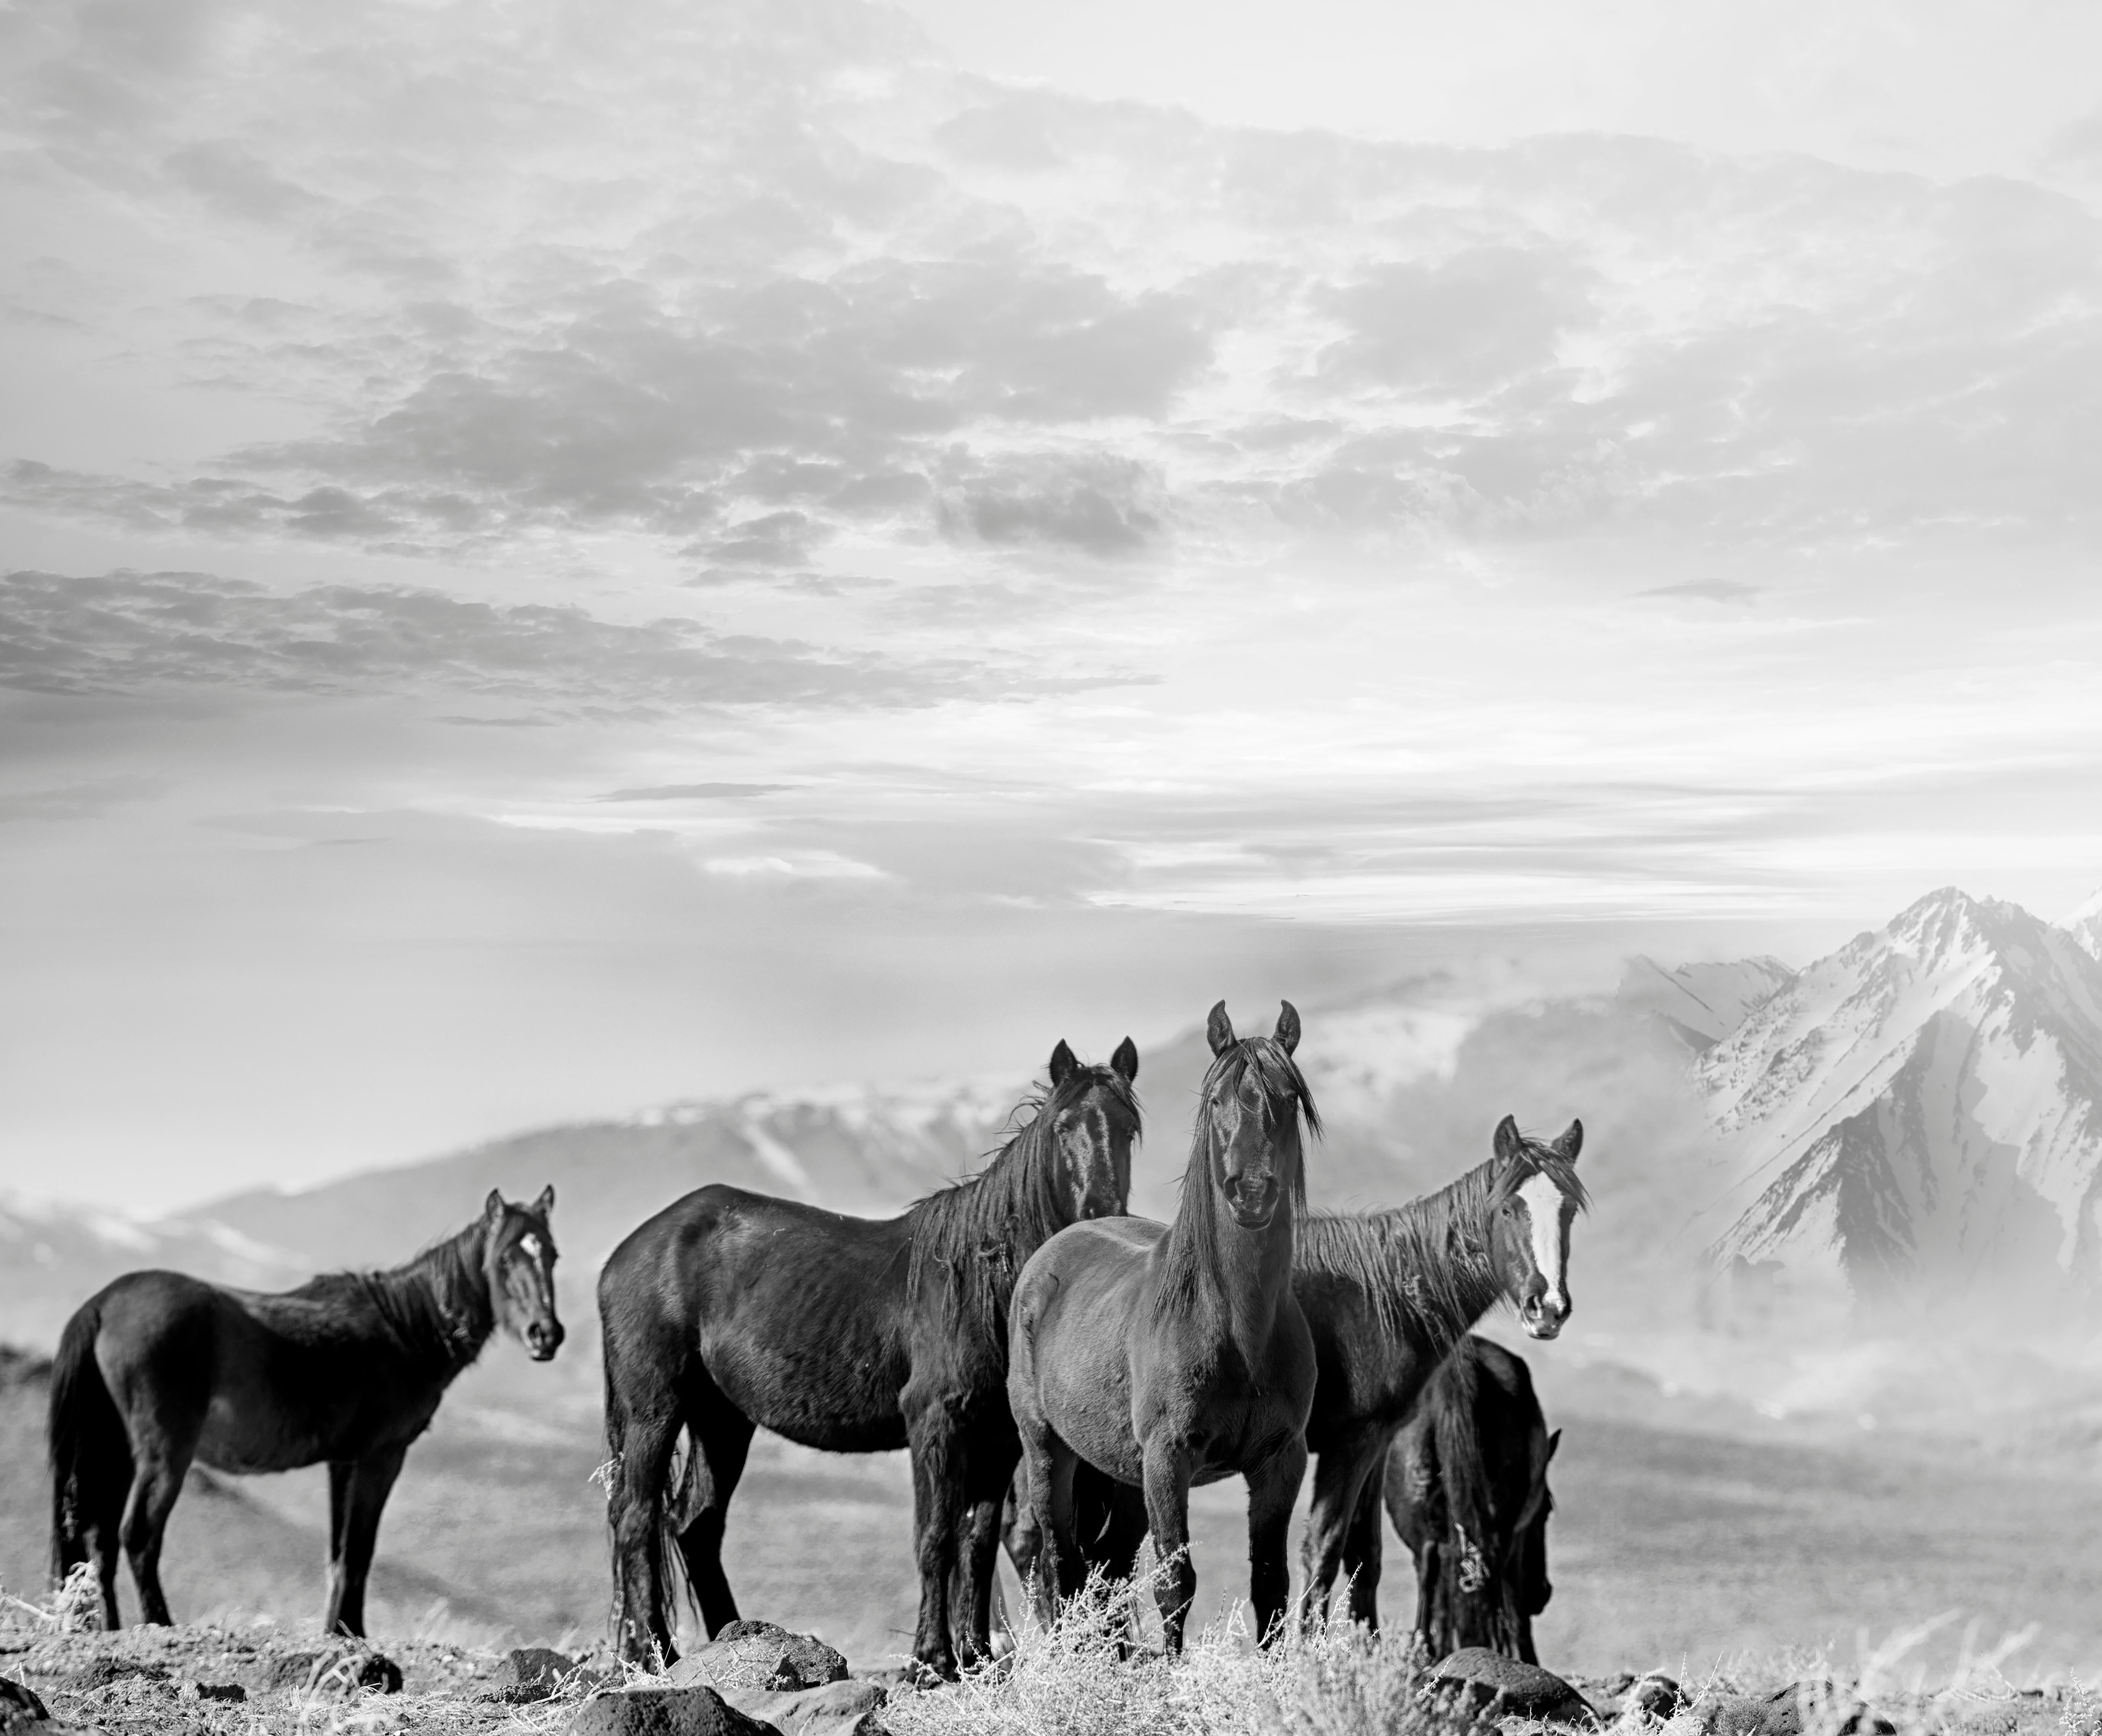 This is a contemporary black and white photograph of Wild Mustangs. 
"They represent the ultimate expression of American freedom"
36x48 Edition of 12. Signed by artist. 
Framing available. Inquire for rates. 

Shane Russeck has built a reputation